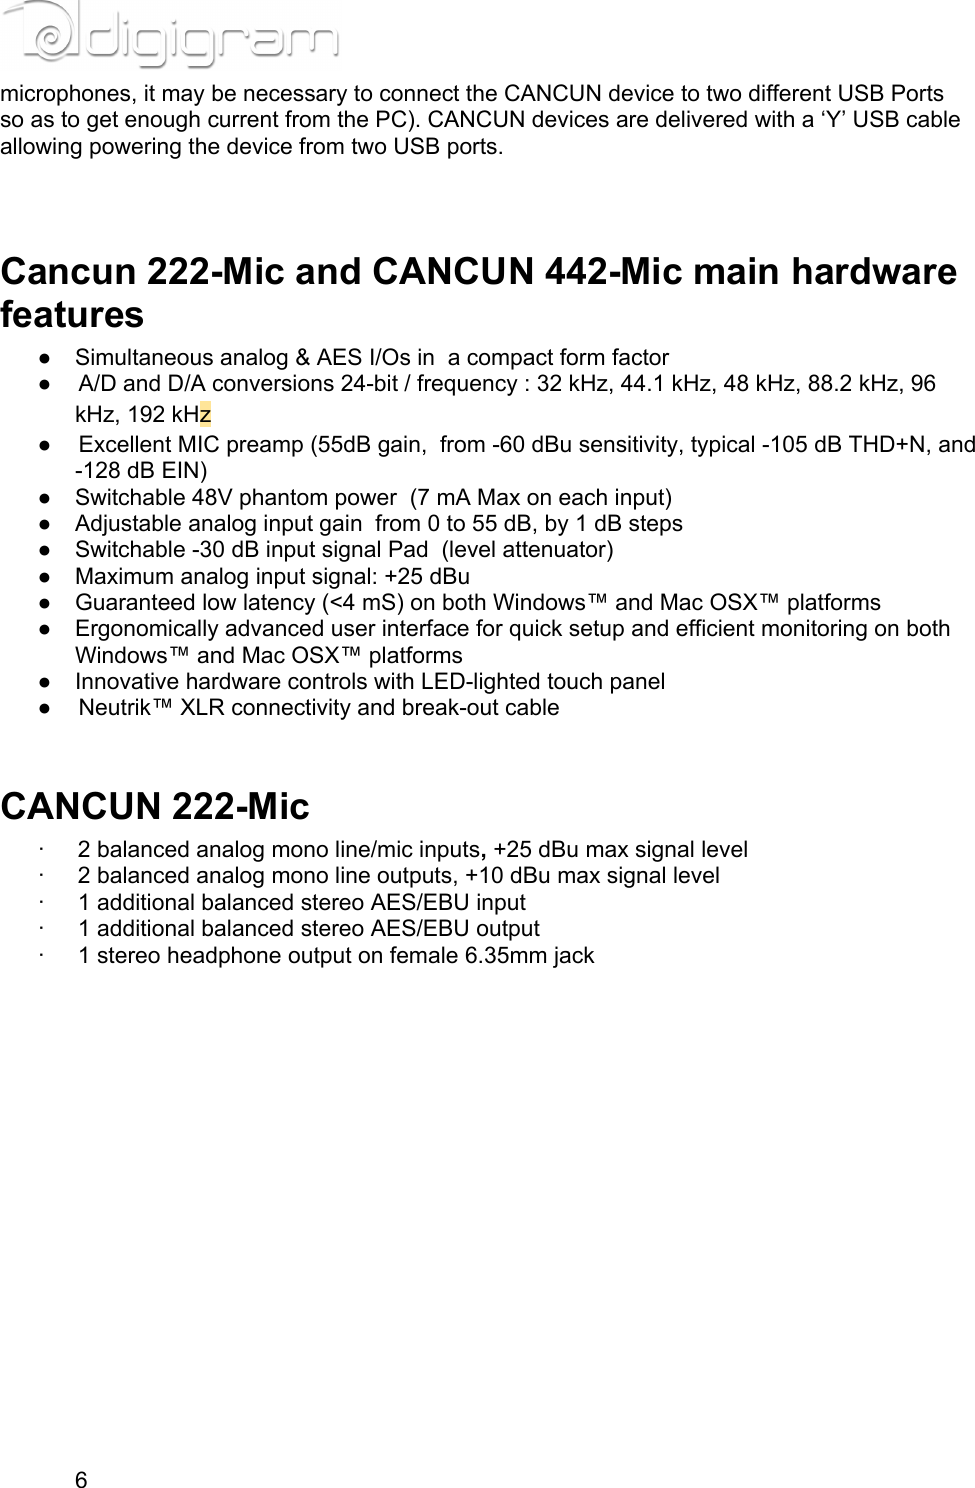 microphones, it may be necessary to connect the CANCUN device to two different USB Ports so as to get enough current from the PC). CANCUN devices are delivered with a ‘Y’ USB cable allowing powering the device from two USB ports.  Cancun 222-Mic and CANCUN 442-Mic main hardware features● Simultaneous analog &amp; AES I/Os in  a compact form factor● A/D and D/A conversions 24-bit / frequency : 32 kHz, 44.1 kHz, 48 kHz, 88.2 kHz, 96 kHz, 192 kHz● Excellent MIC preamp (55dB gain,  from -60 dBu sensitivity, typical -105 dB THD+N, and -128 dB EIN)● Switchable 48V phantom power  (7 mA Max on each input)● Adjustable analog input gain  from 0 to 55 dB, by 1 dB steps● Switchable -30 dB input signal Pad  (level attenuator)● Maximum analog input signal: +25 dBu● Guaranteed low latency (&lt;4 mS) on both Windows™ and Mac OSX™ platforms● Ergonomically advanced user interface for quick setup and efficient monitoring on both Windows™ and Mac OSX™ platforms● Innovative hardware controls with LED-lighted touch panel● Neutrik™ XLR connectivity and break-out cable CANCUN 222-Mic·         2 balanced analog mono line/mic inputs, +25 dBu max signal level·         2 balanced analog mono line outputs, +10 dBu max signal level·         1 additional balanced stereo AES/EBU input·         1 additional balanced stereo AES/EBU output·         1 stereo headphone output on female 6.35mm jack6